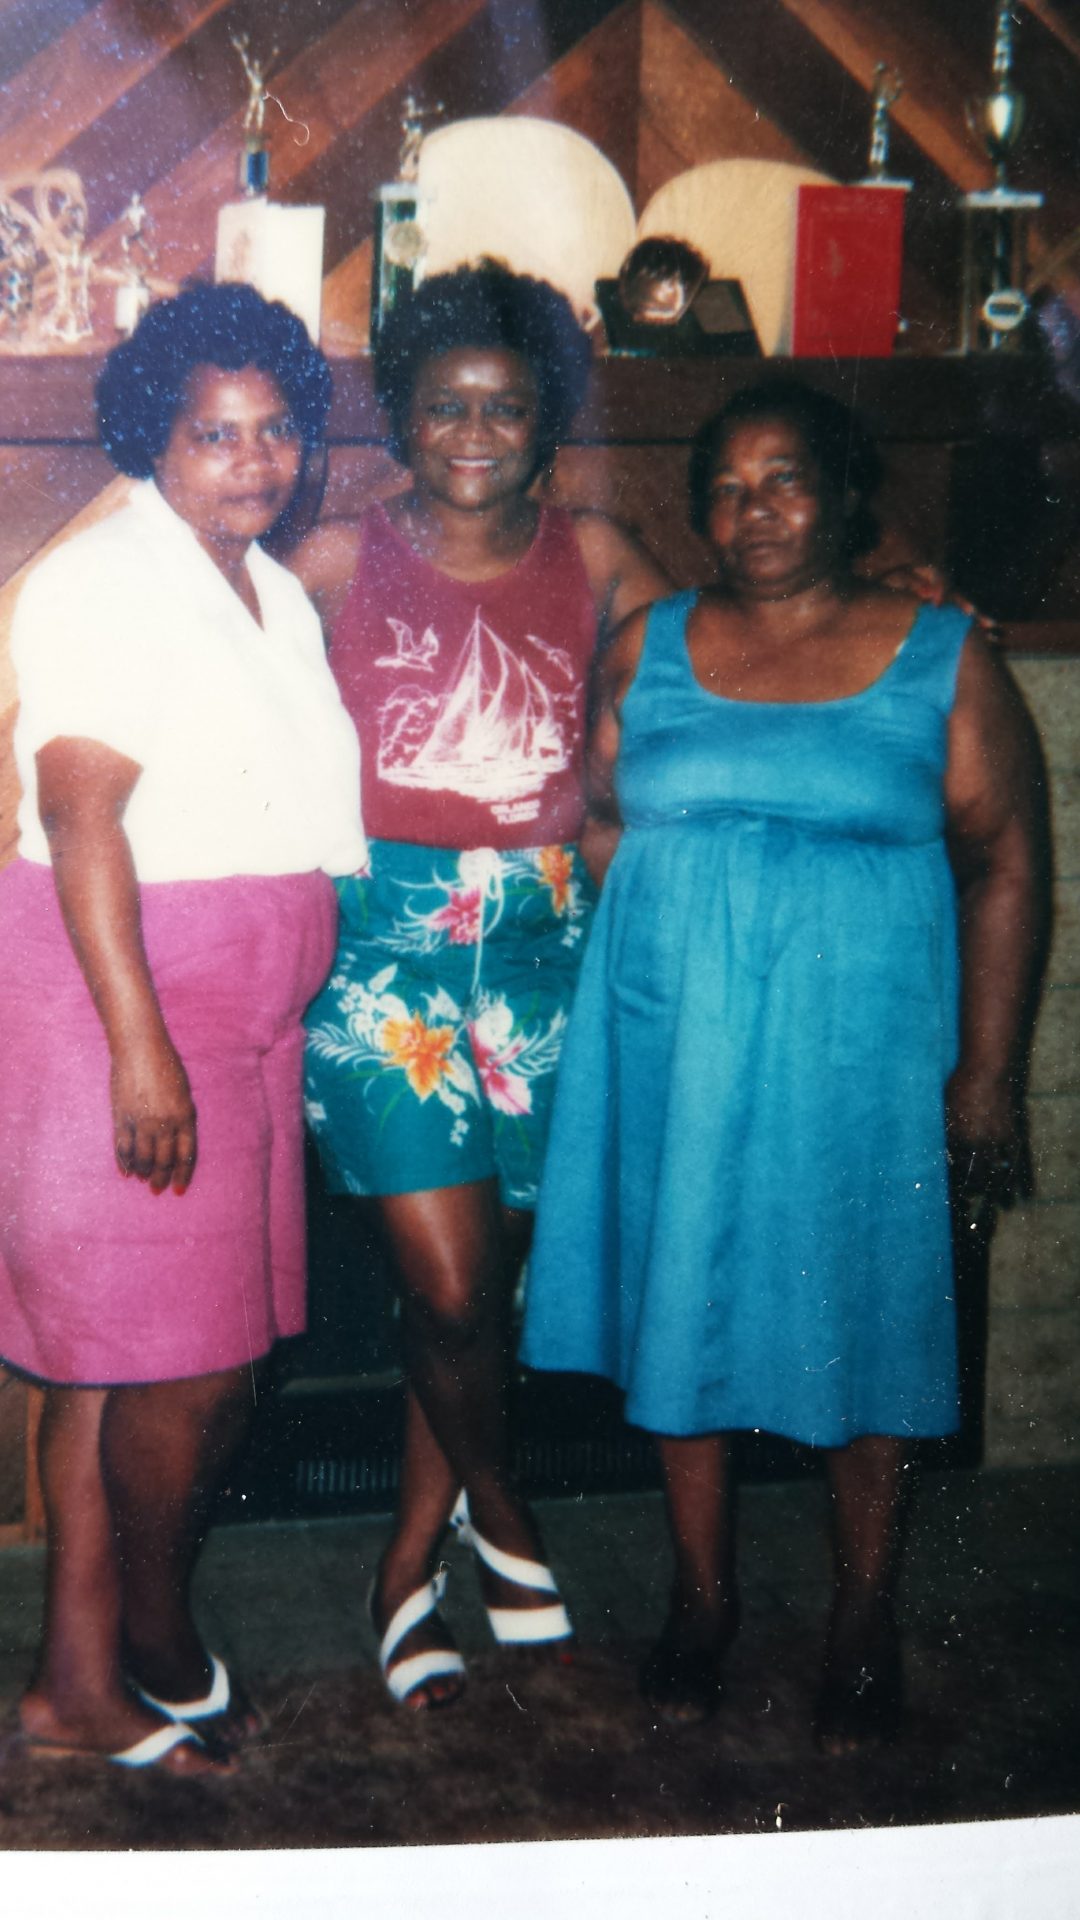 Luella, Janice and Ms. Fannie 1986